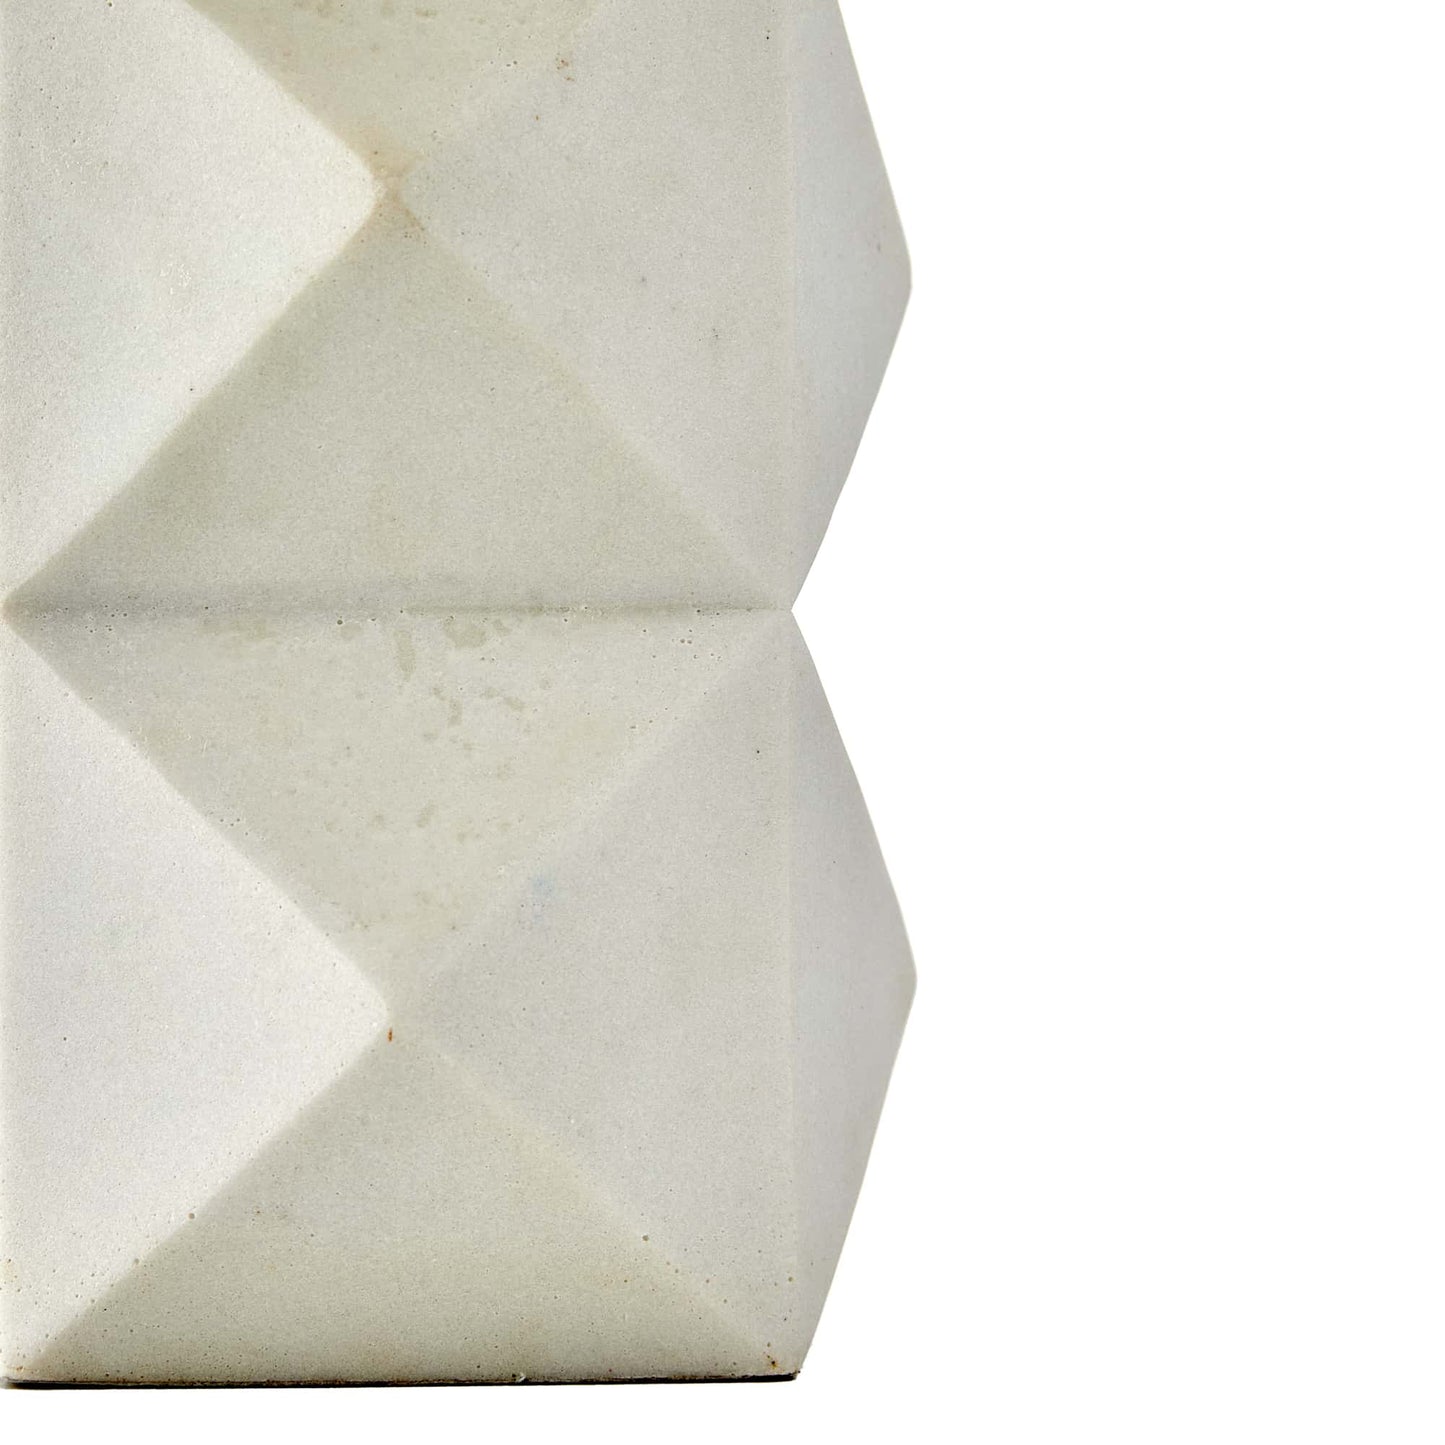 Steele Lamp - Ivory Riverstone Composite, Faceted Facade